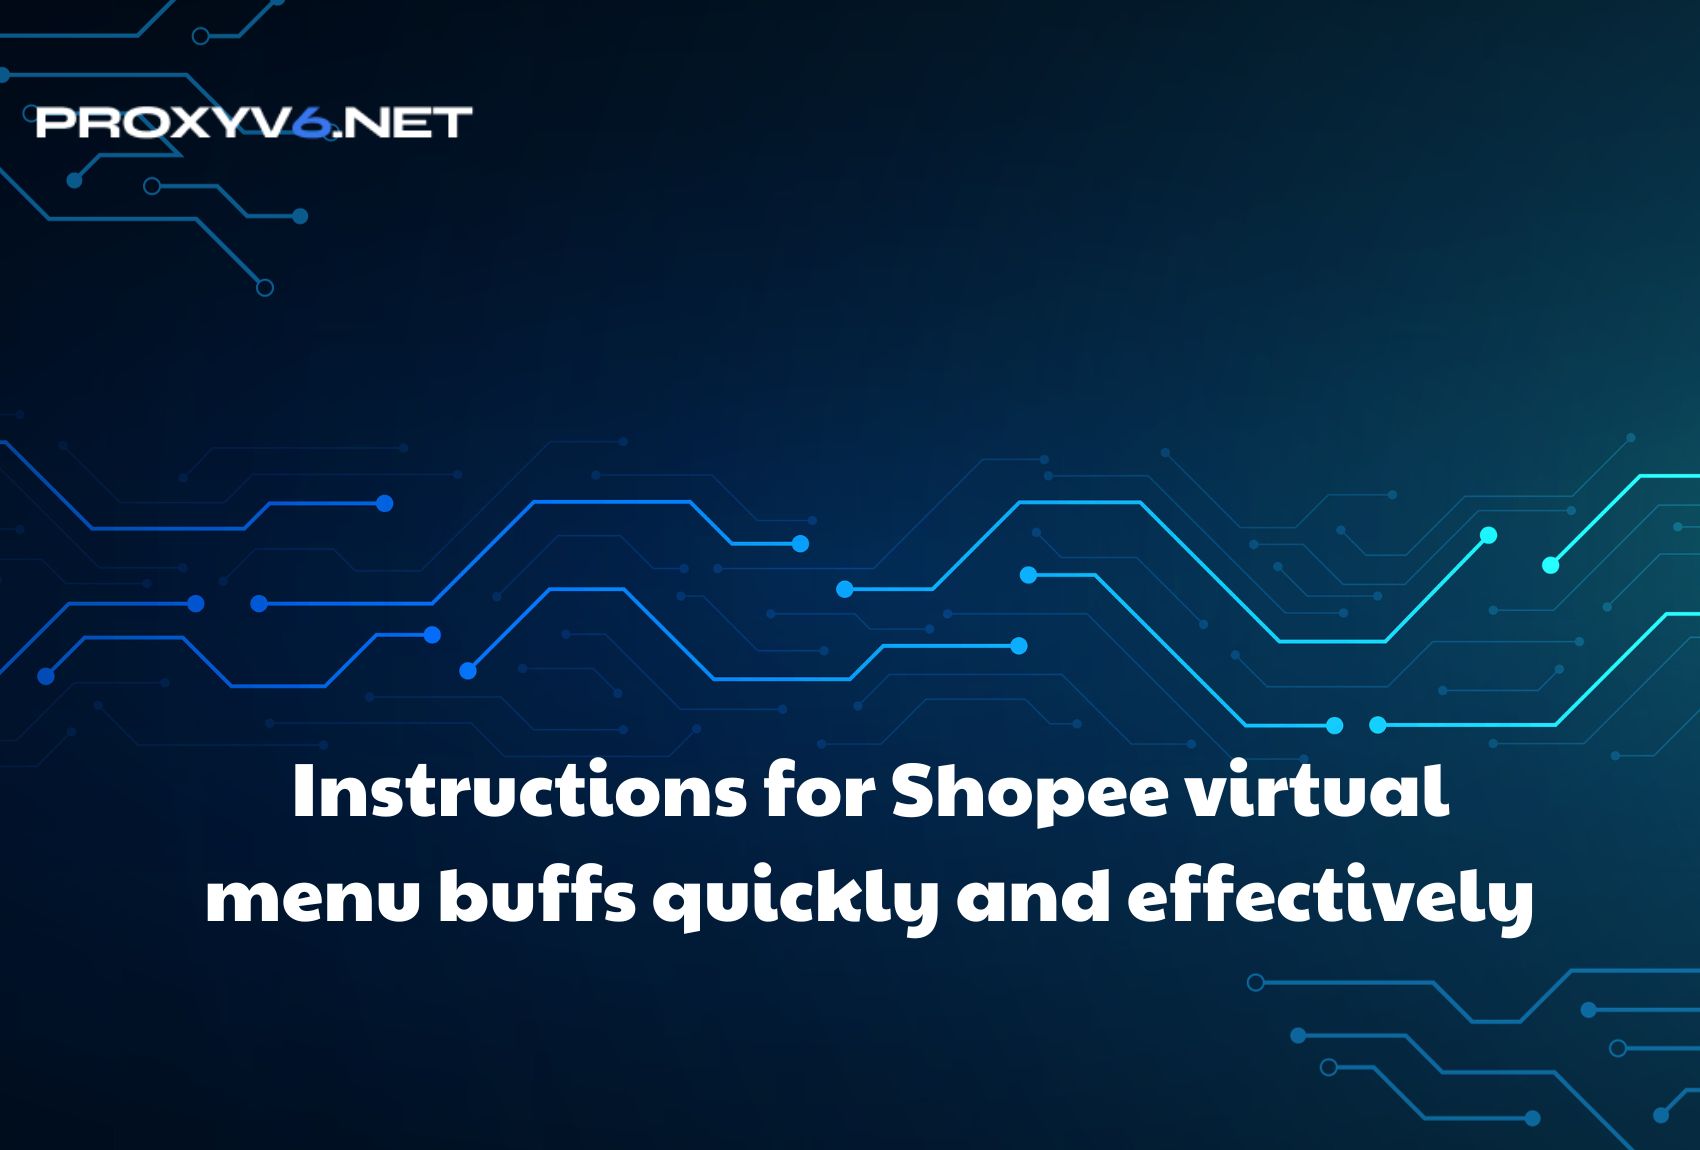 Instructions for Shopee virtual menu buffs quickly and effectively